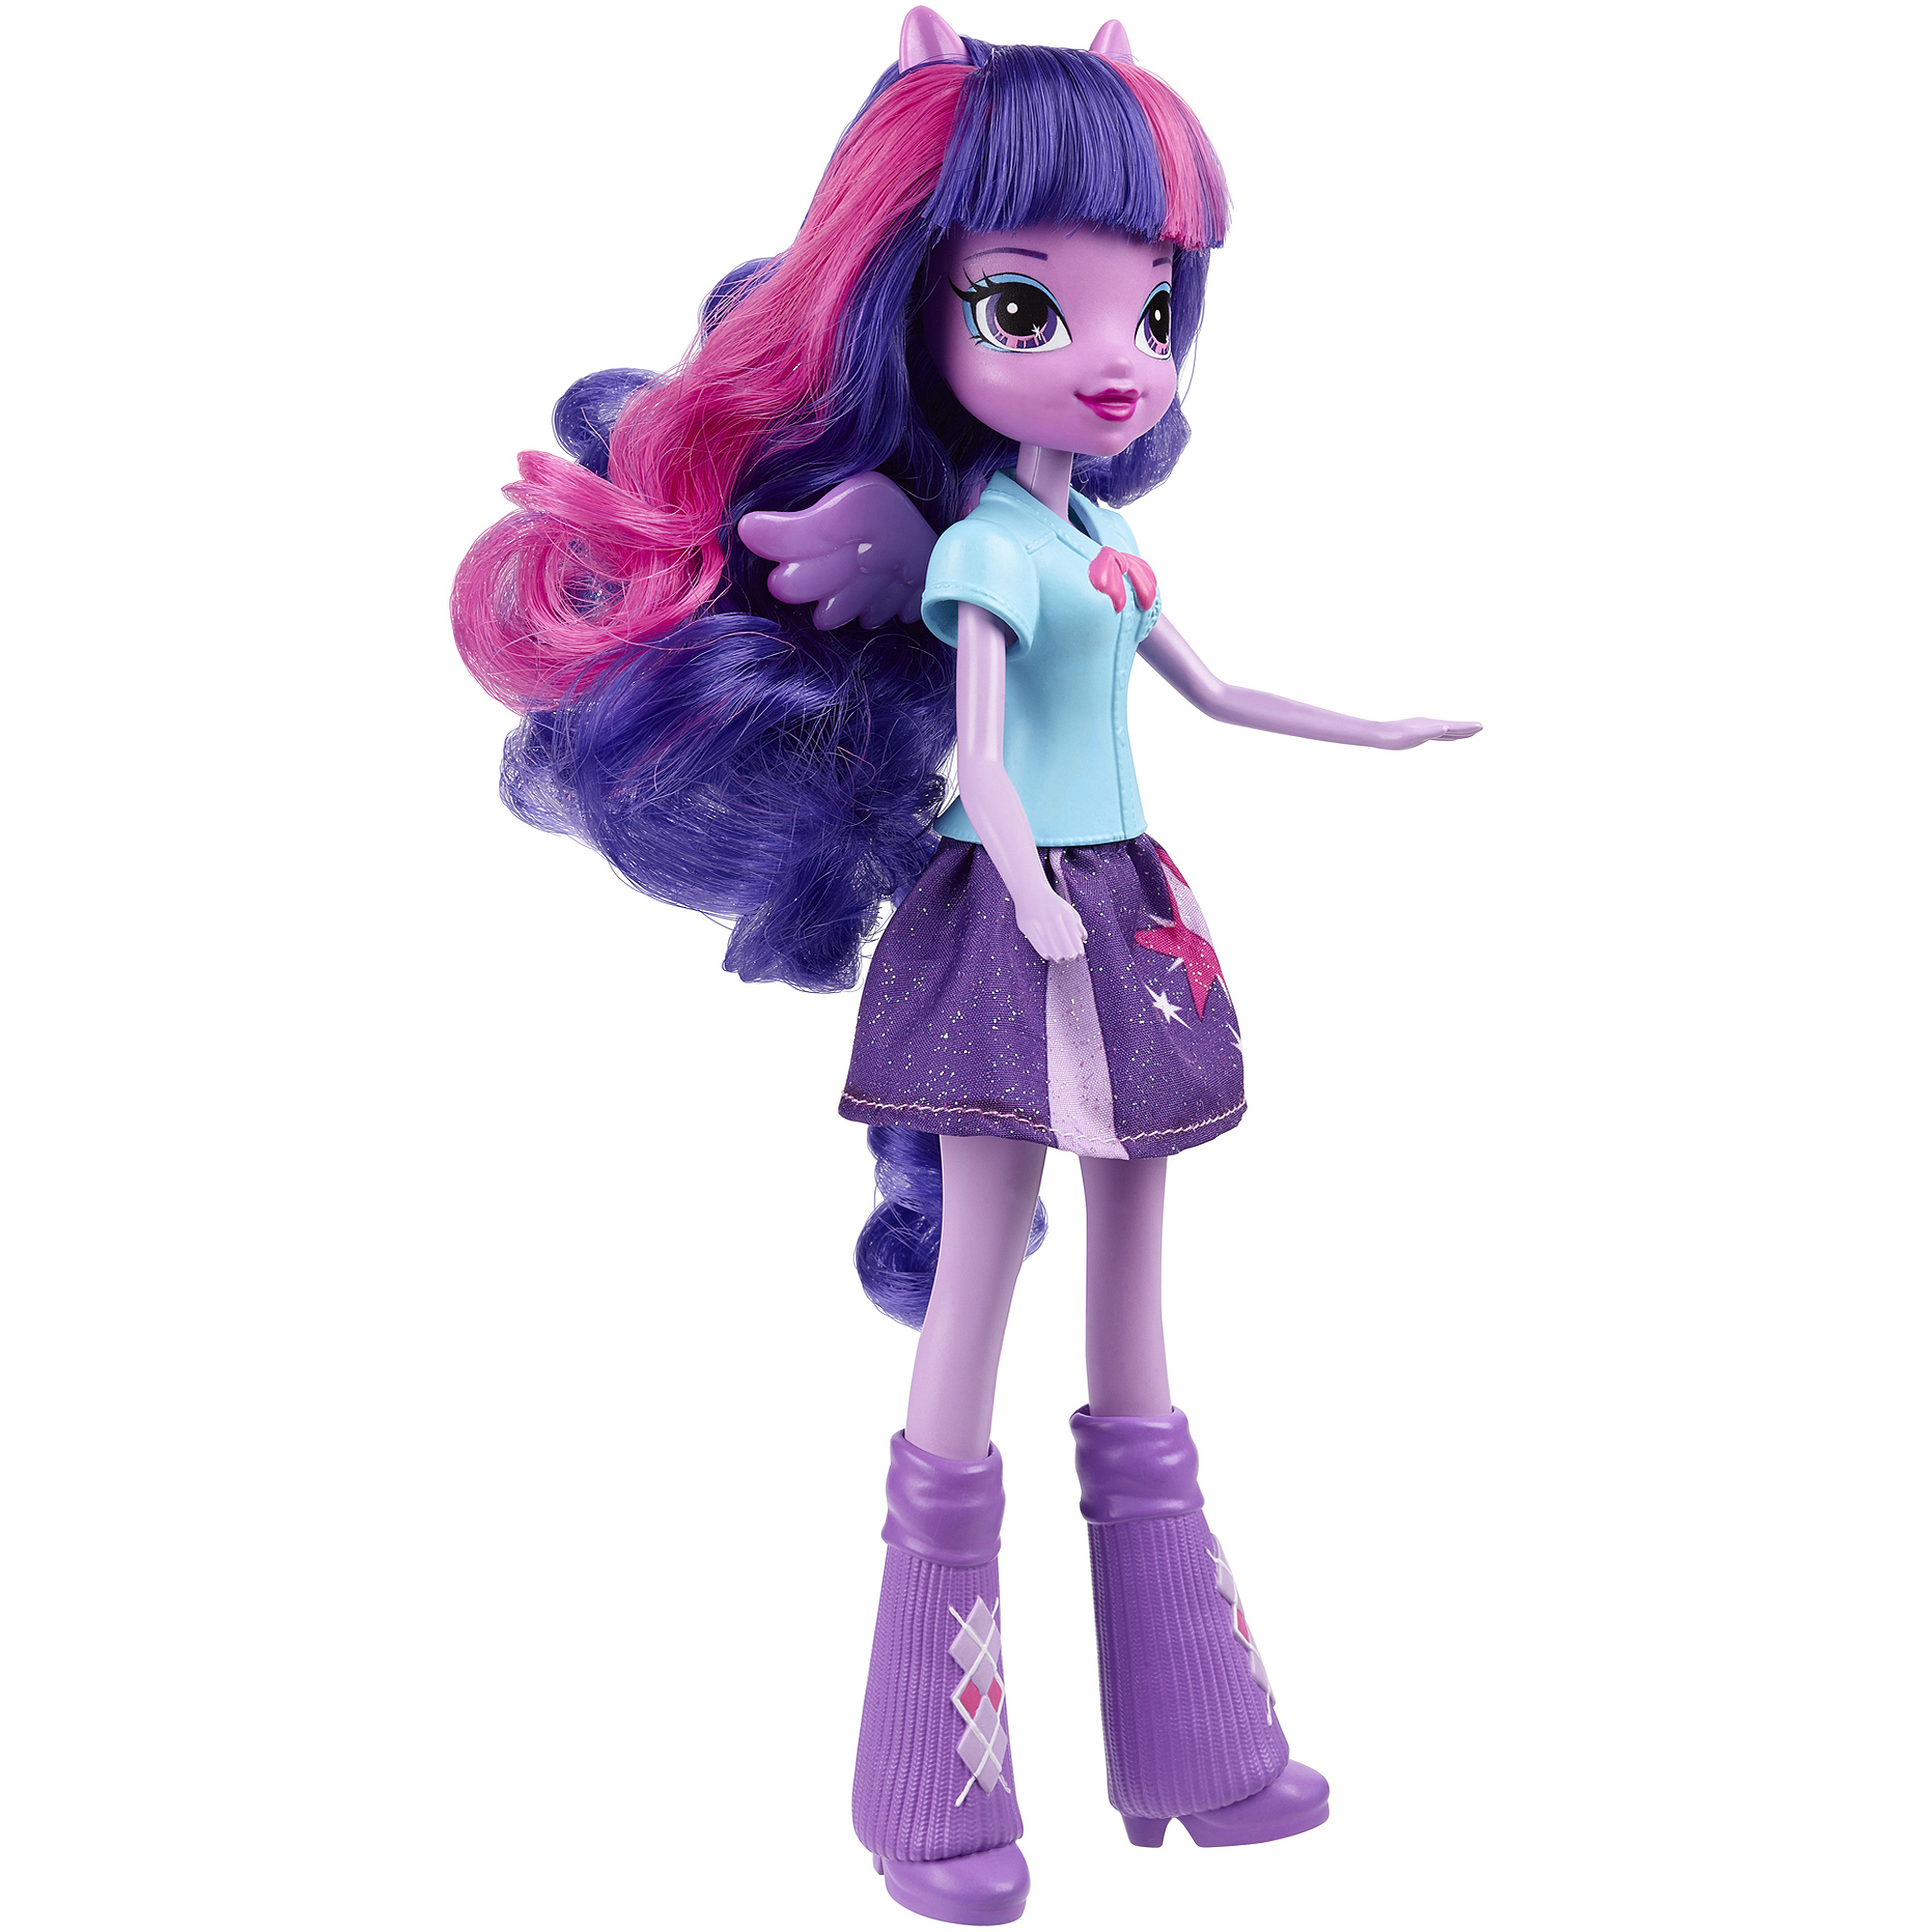 My Little Pony Equestria Girls Collection Twilight Sparkle Doll - image 1 of 10